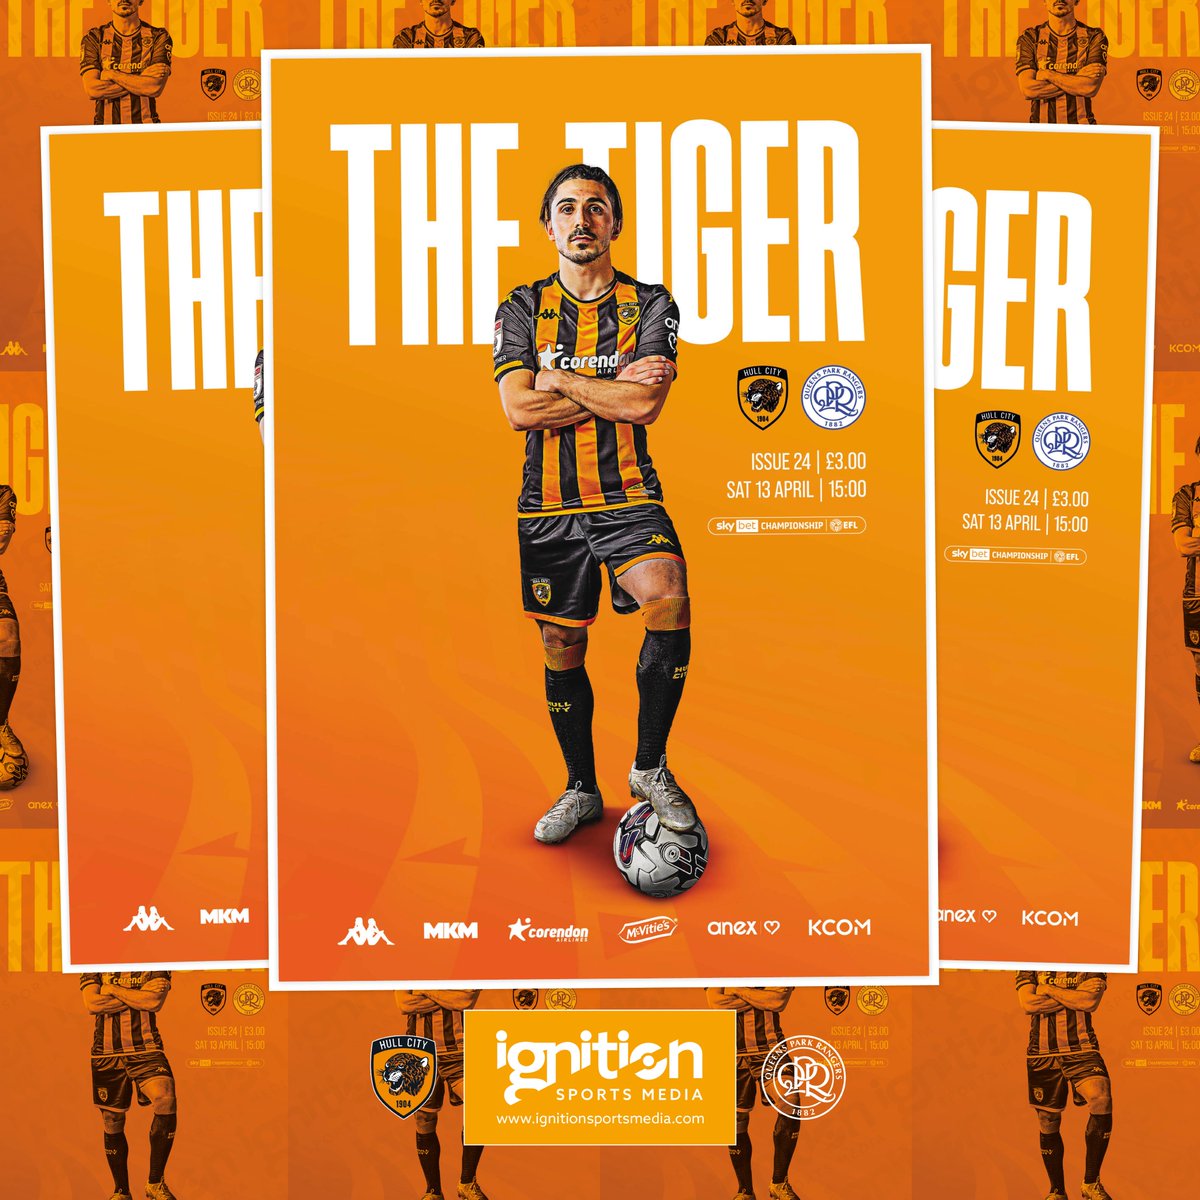 Hull City hosting QPR has seen three or more goals on the past five occasions and the Tigers will want to put on another show in their penultimate home fixture of the season. Reserve your copy for £3 from ignitionsportsmedia.com/products/hull-… @HullCity @QPR @EFL